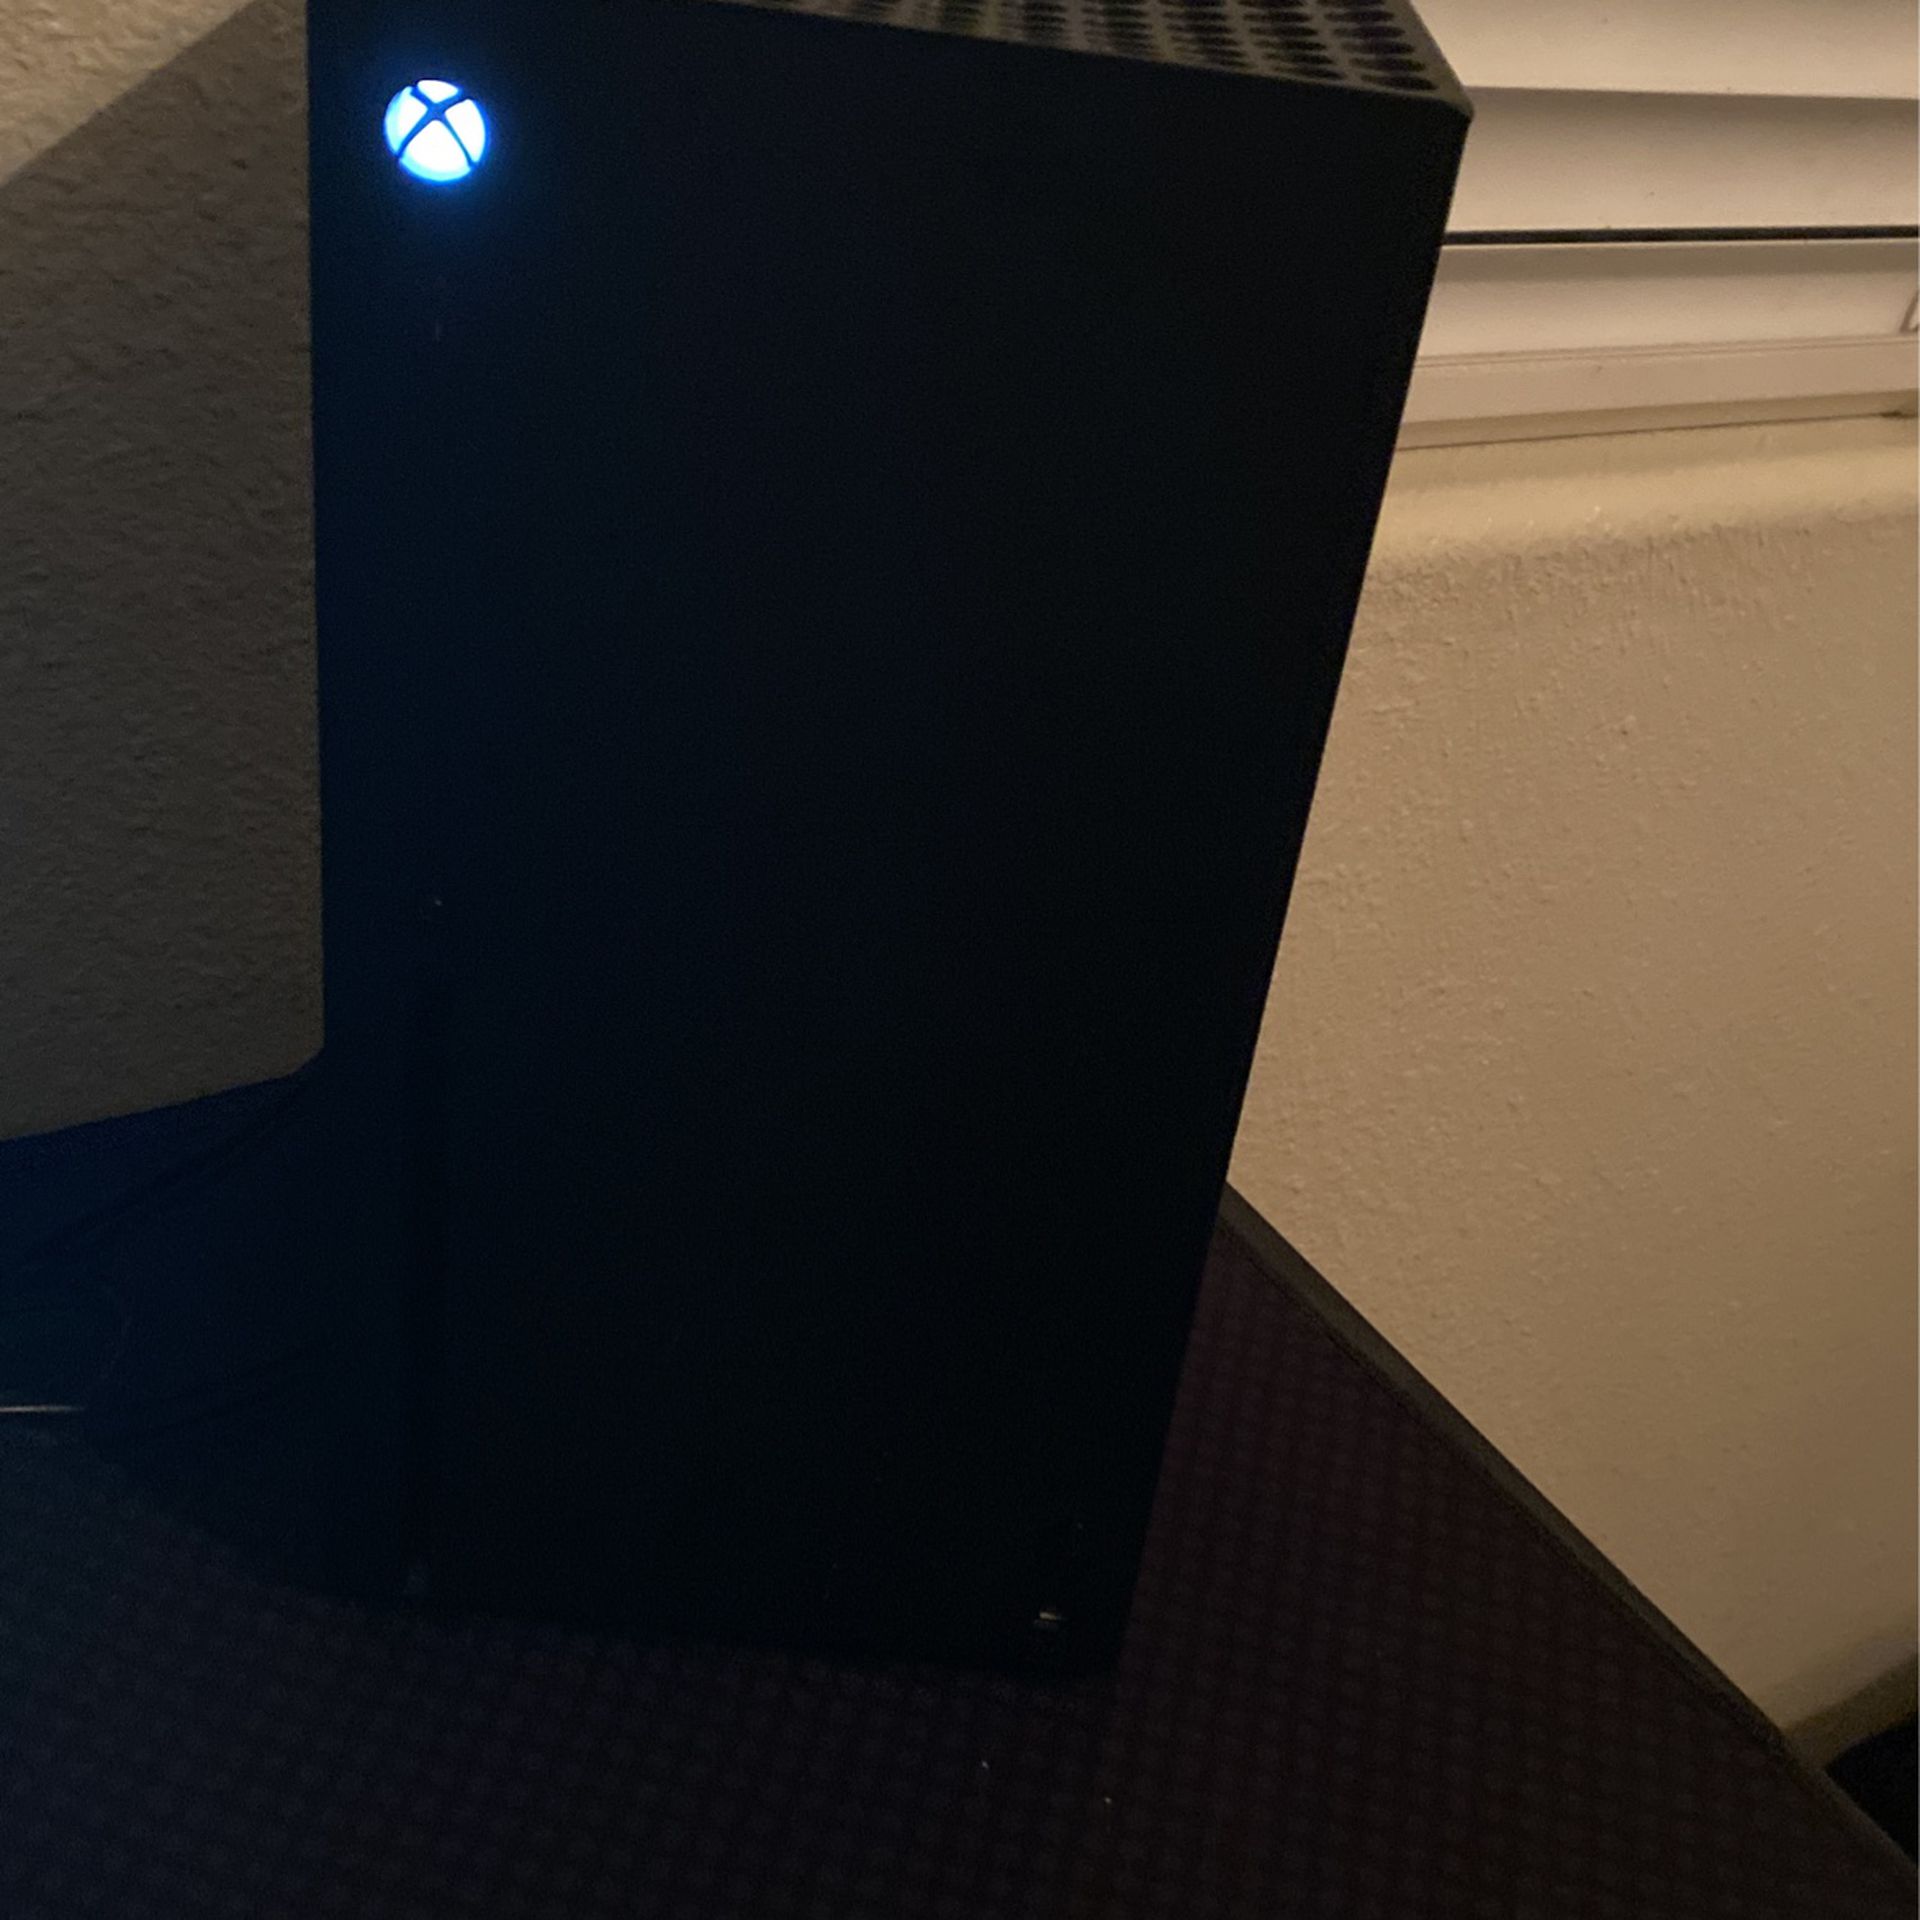 Xbox Series X With Monitor